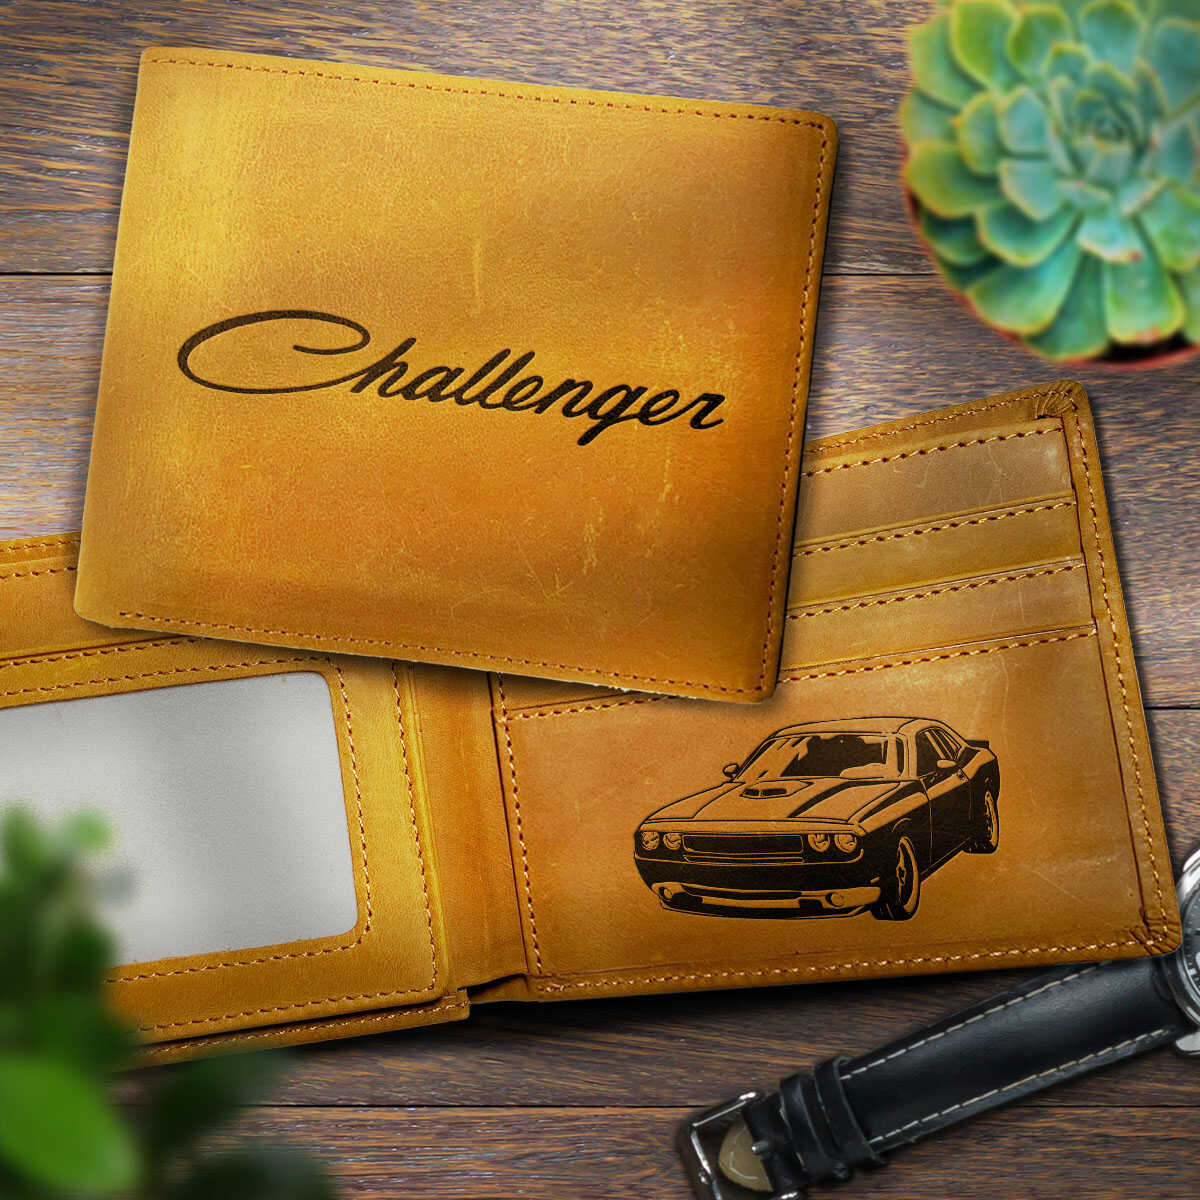 Challenger Hand-made Engraved Leather Bifold Wallet